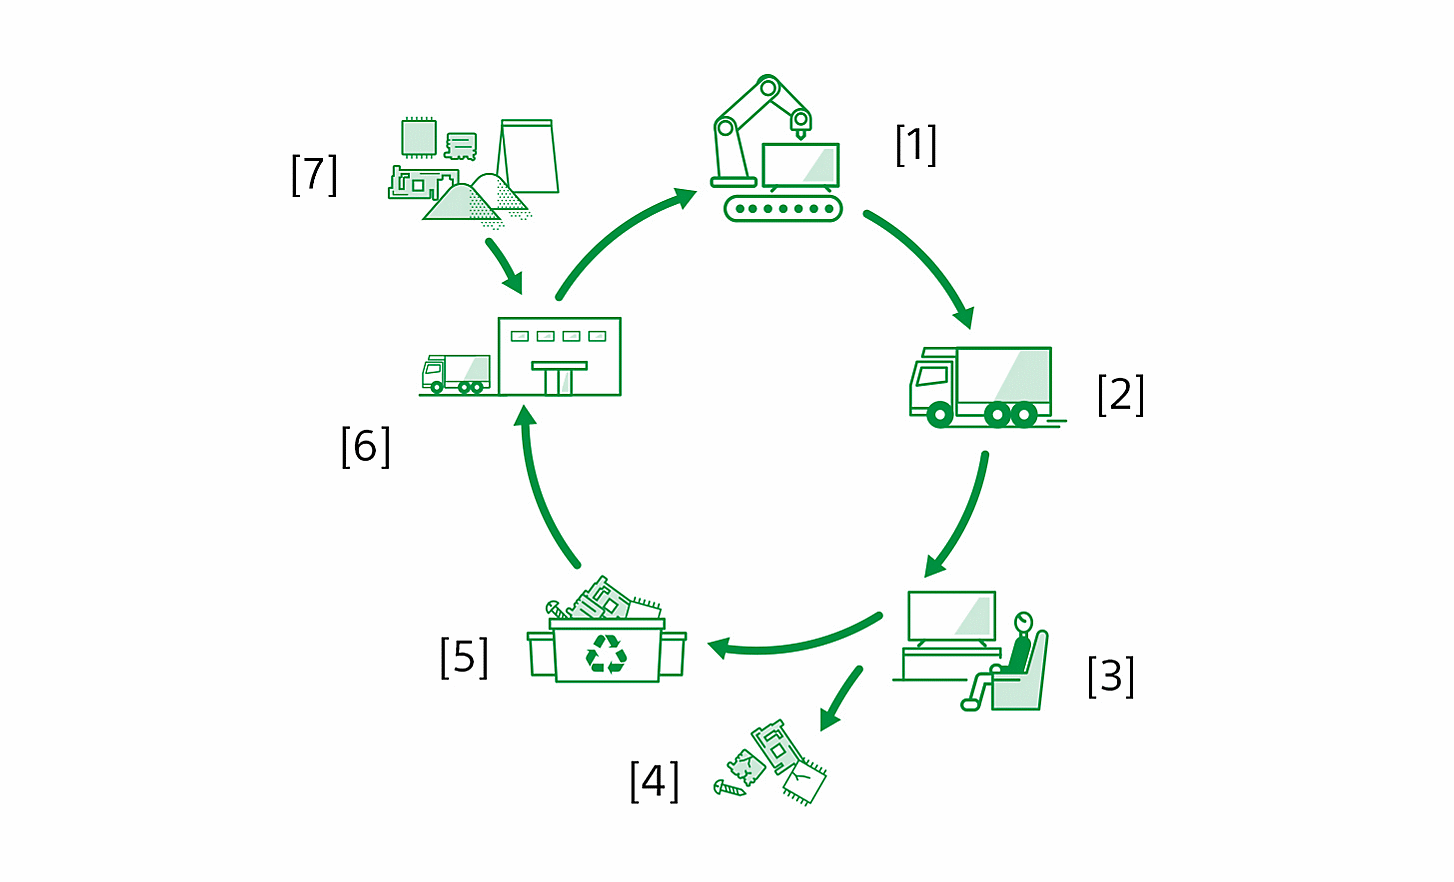 Diagram showing life cycle of a product from manufacturing to recycling material, with labels: [1] Manufacturing of products at factory sites [2] Logistics [3] Use of products by customers [4] Resource extraction and disposal [5] Recycling sites [6] Manufacturing of parts by suppliers [7] Resource extraction